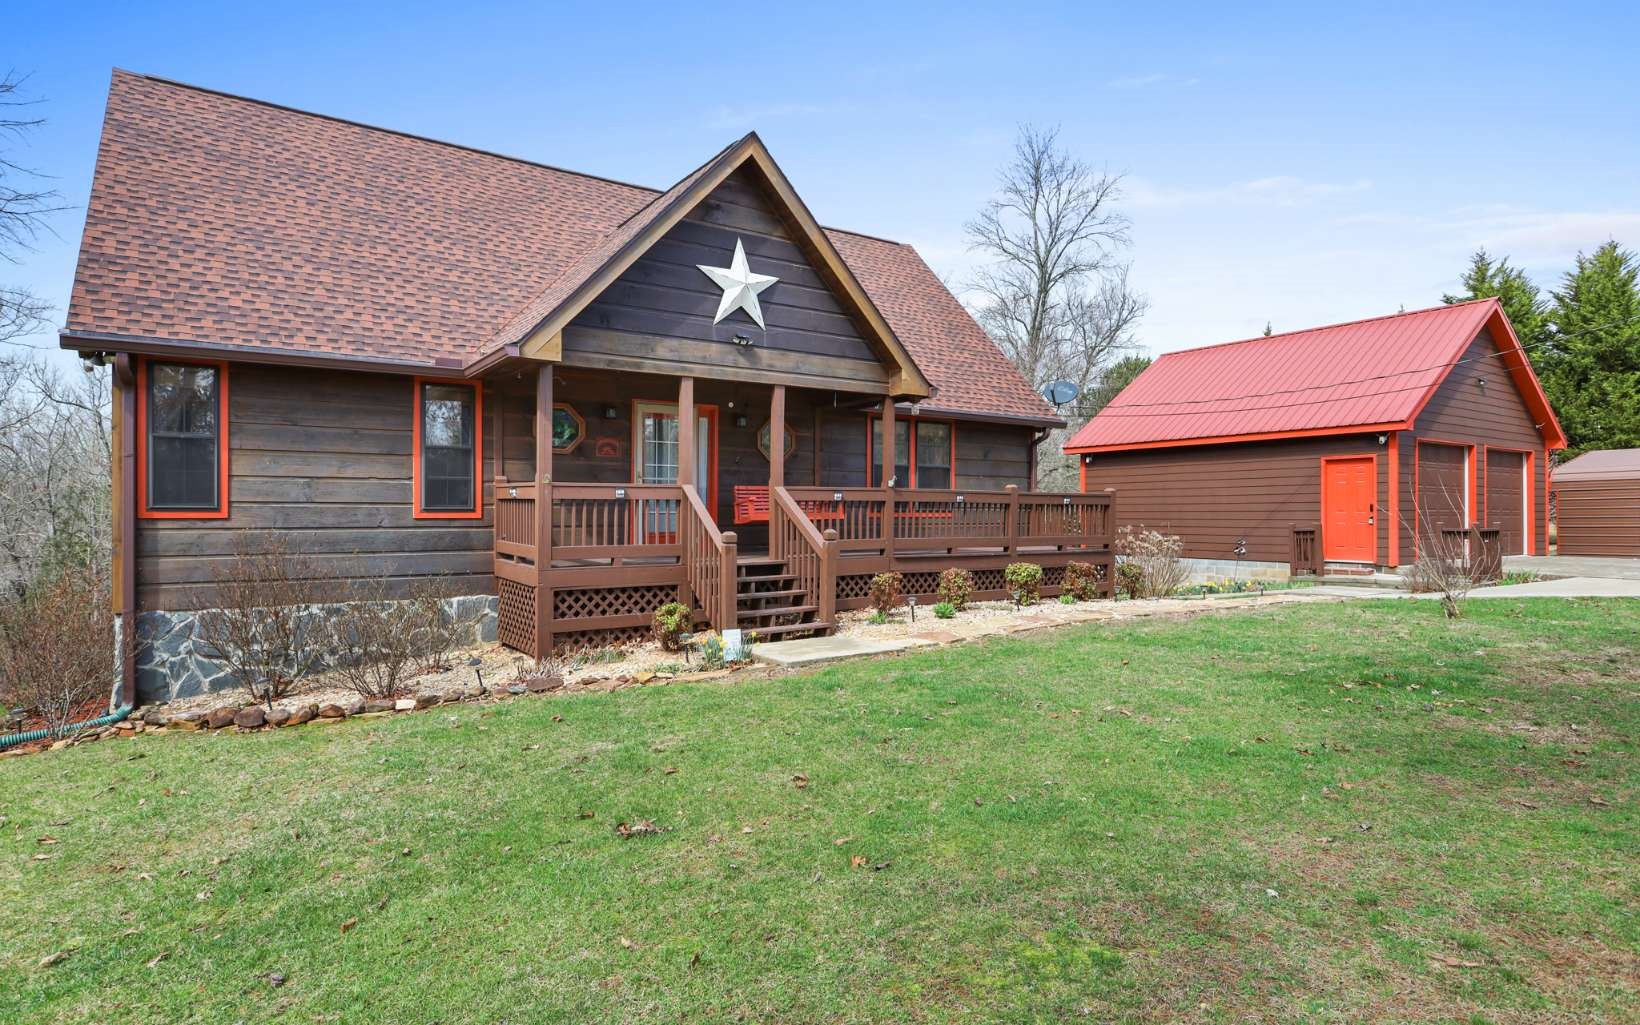 Its time to finally buy that mountain cabin, this one has it all! This cabin is the PERFECT retreat for your family and friends, only 90 minutes from Atlanta. Start a new family tradition now in this super FUN cabin with some awesome amenities! You will LOVE the downstairs and the outdoor activities with an awesome private backyard.! Located less than 15 min from downtown Blue Ridge. Close by is Lake Blue Ridge, tubing on the Toccoa, and some of the best hiking trails and wineries! The drive to the cabin is easy to get back and forth from your excursions. Enjoy some seasonal mountain views!